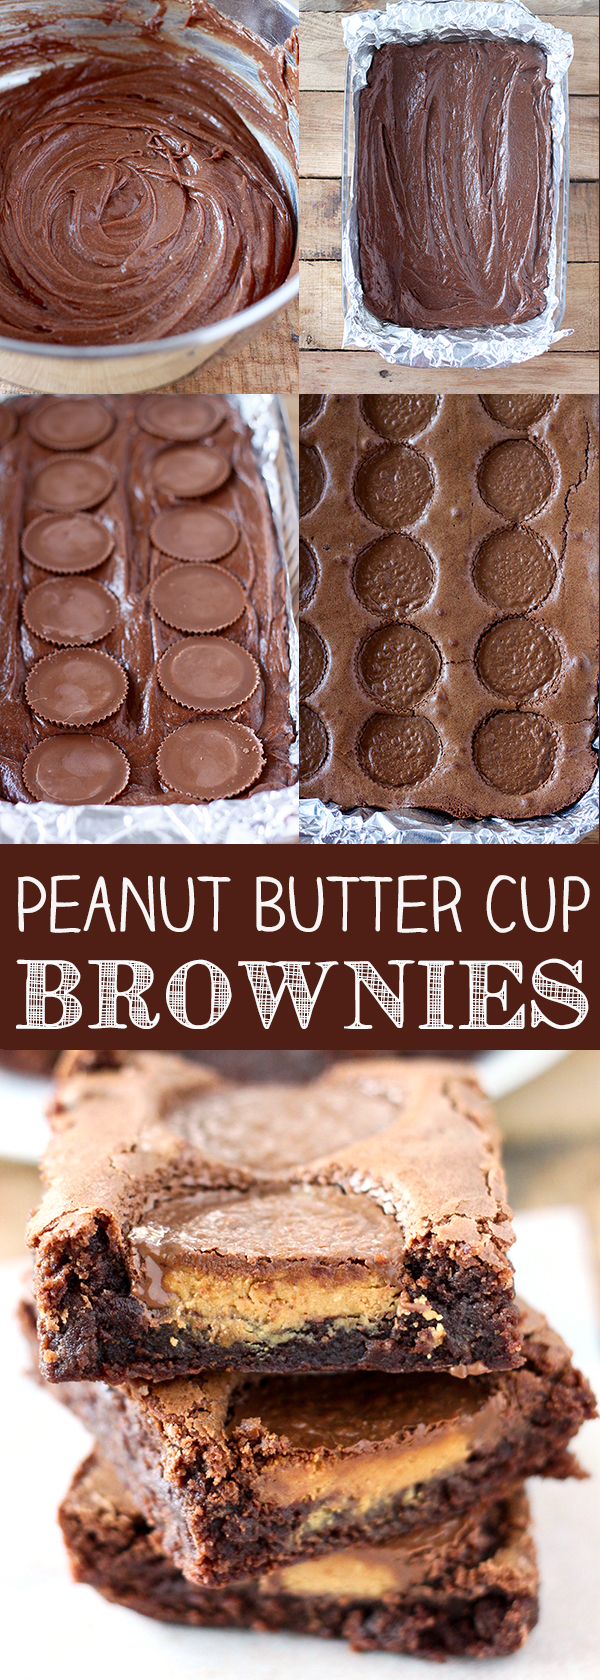 Reese's Peanut Butter Cup Brownies - homemade brownies with real peanut butter cups baked right in. 